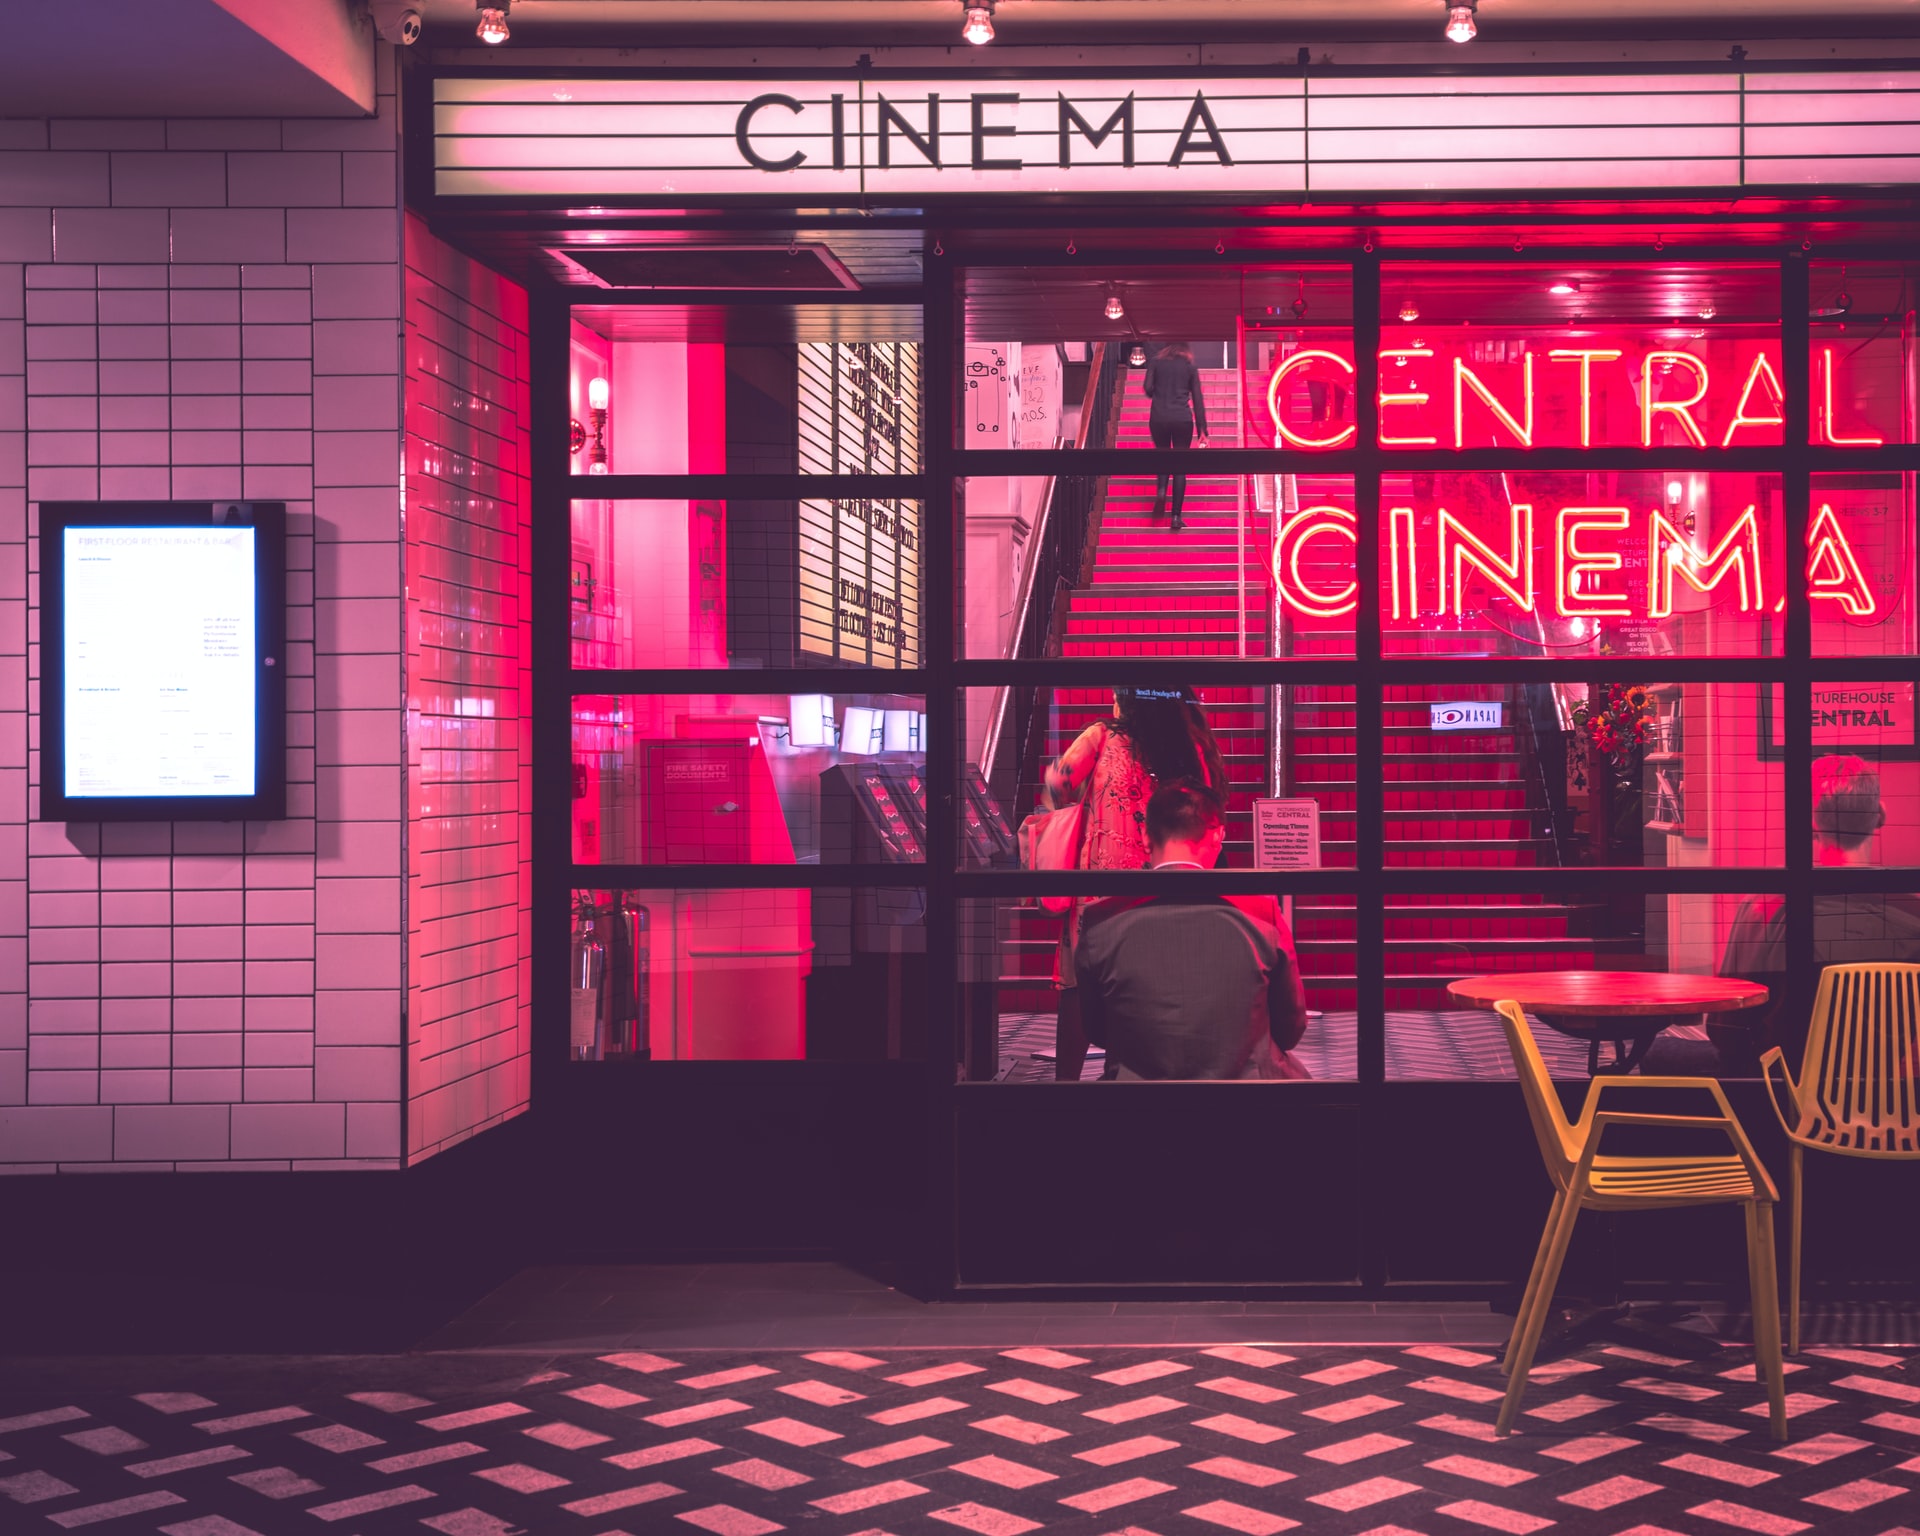 You can earn points for movie-related purchases! Source: Unsplash